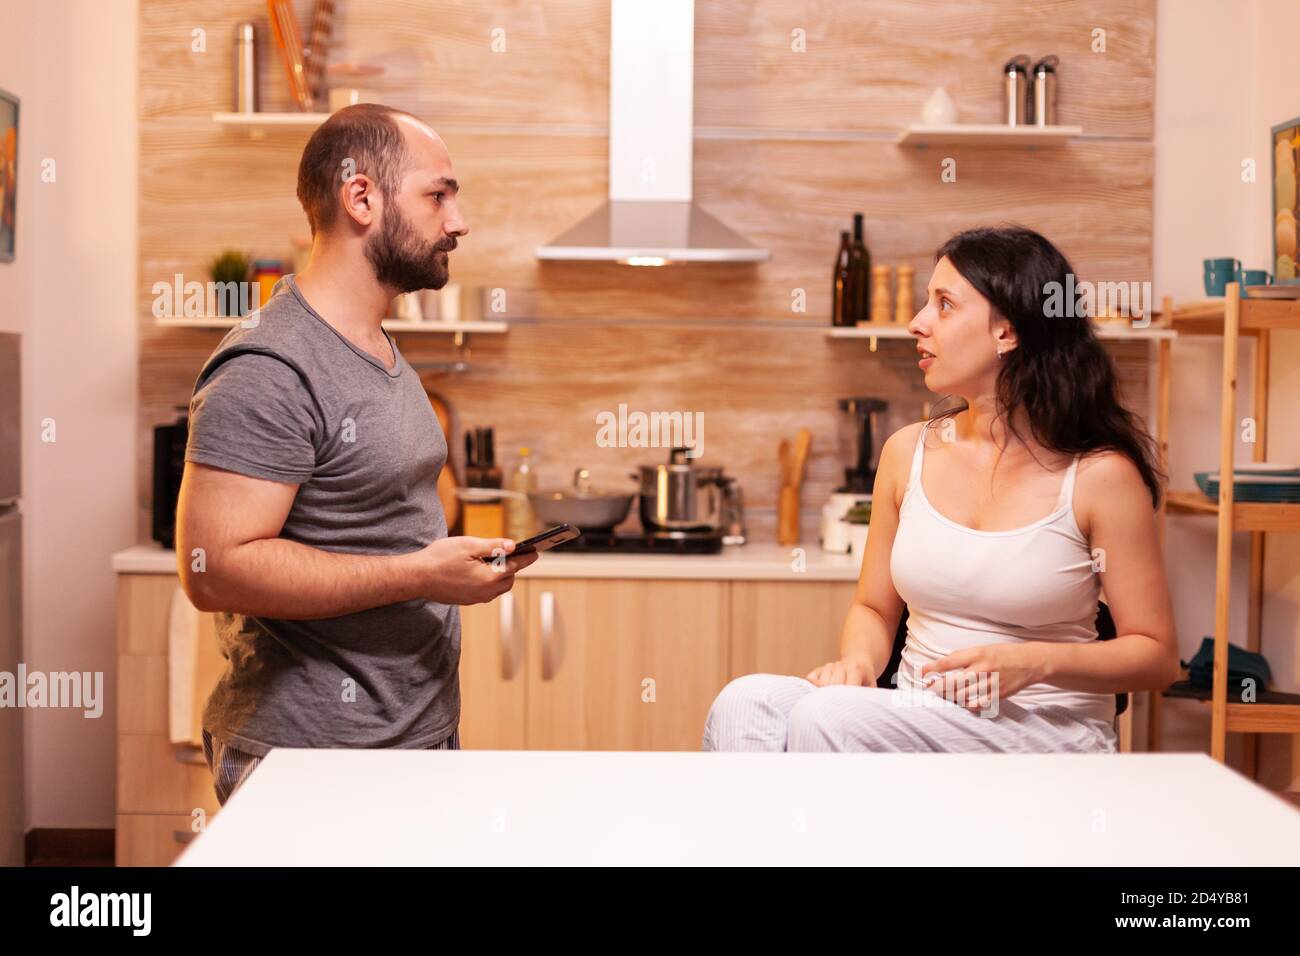 Angry husband confronting cheating wife about infidelity while holding her phone. Frustrated offended irritated accusing woman of infidelity arguing her. Stock Photo